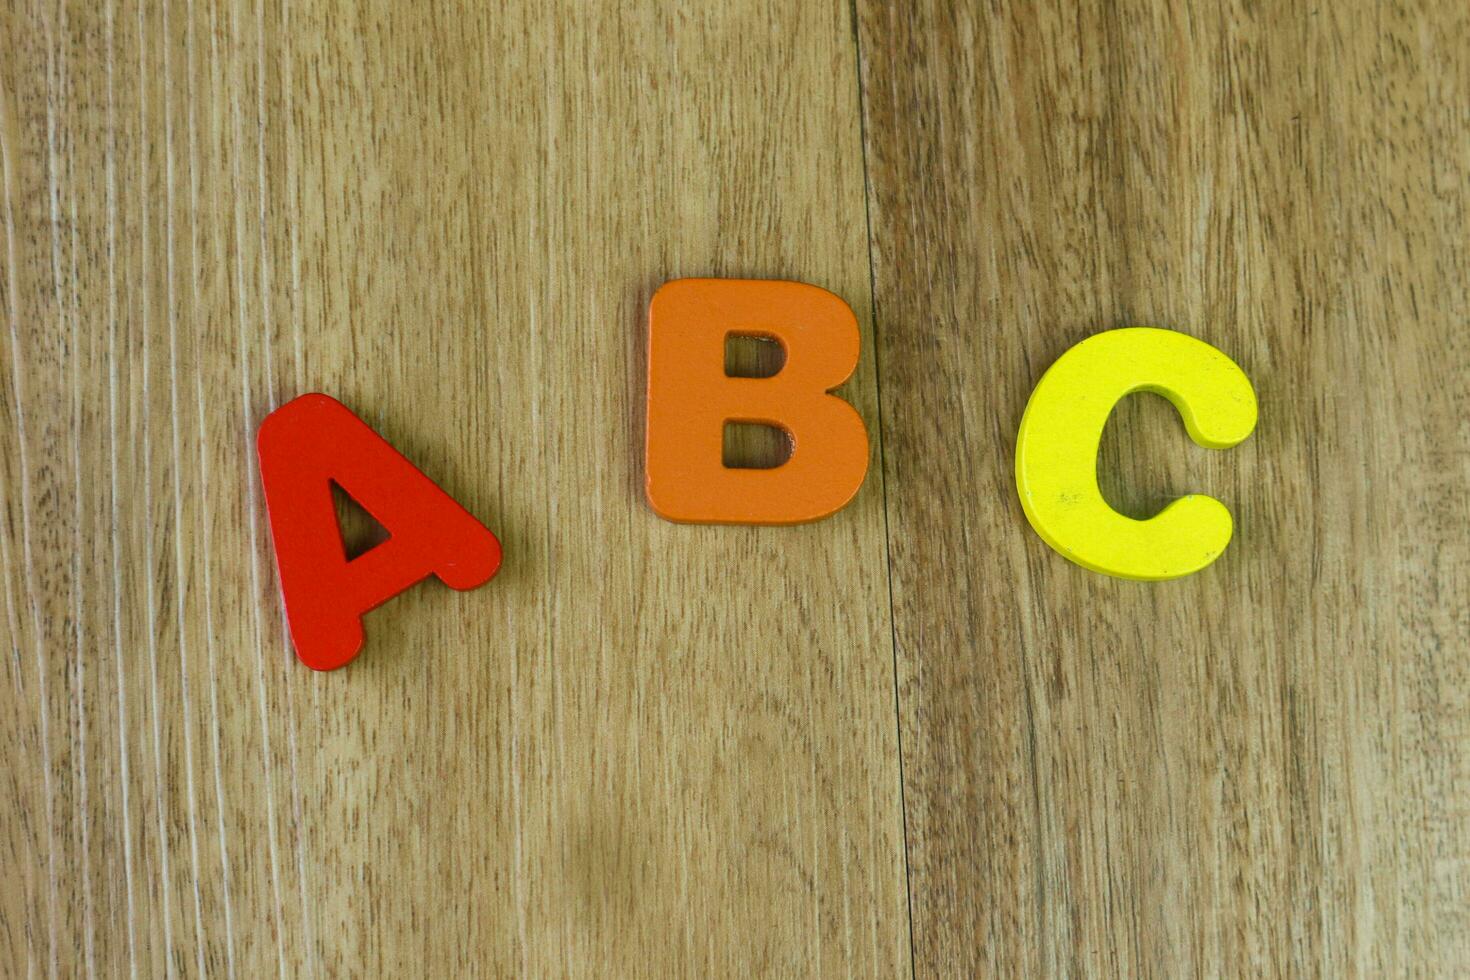 ABC - children's alphabet learning set on the wooden background photo